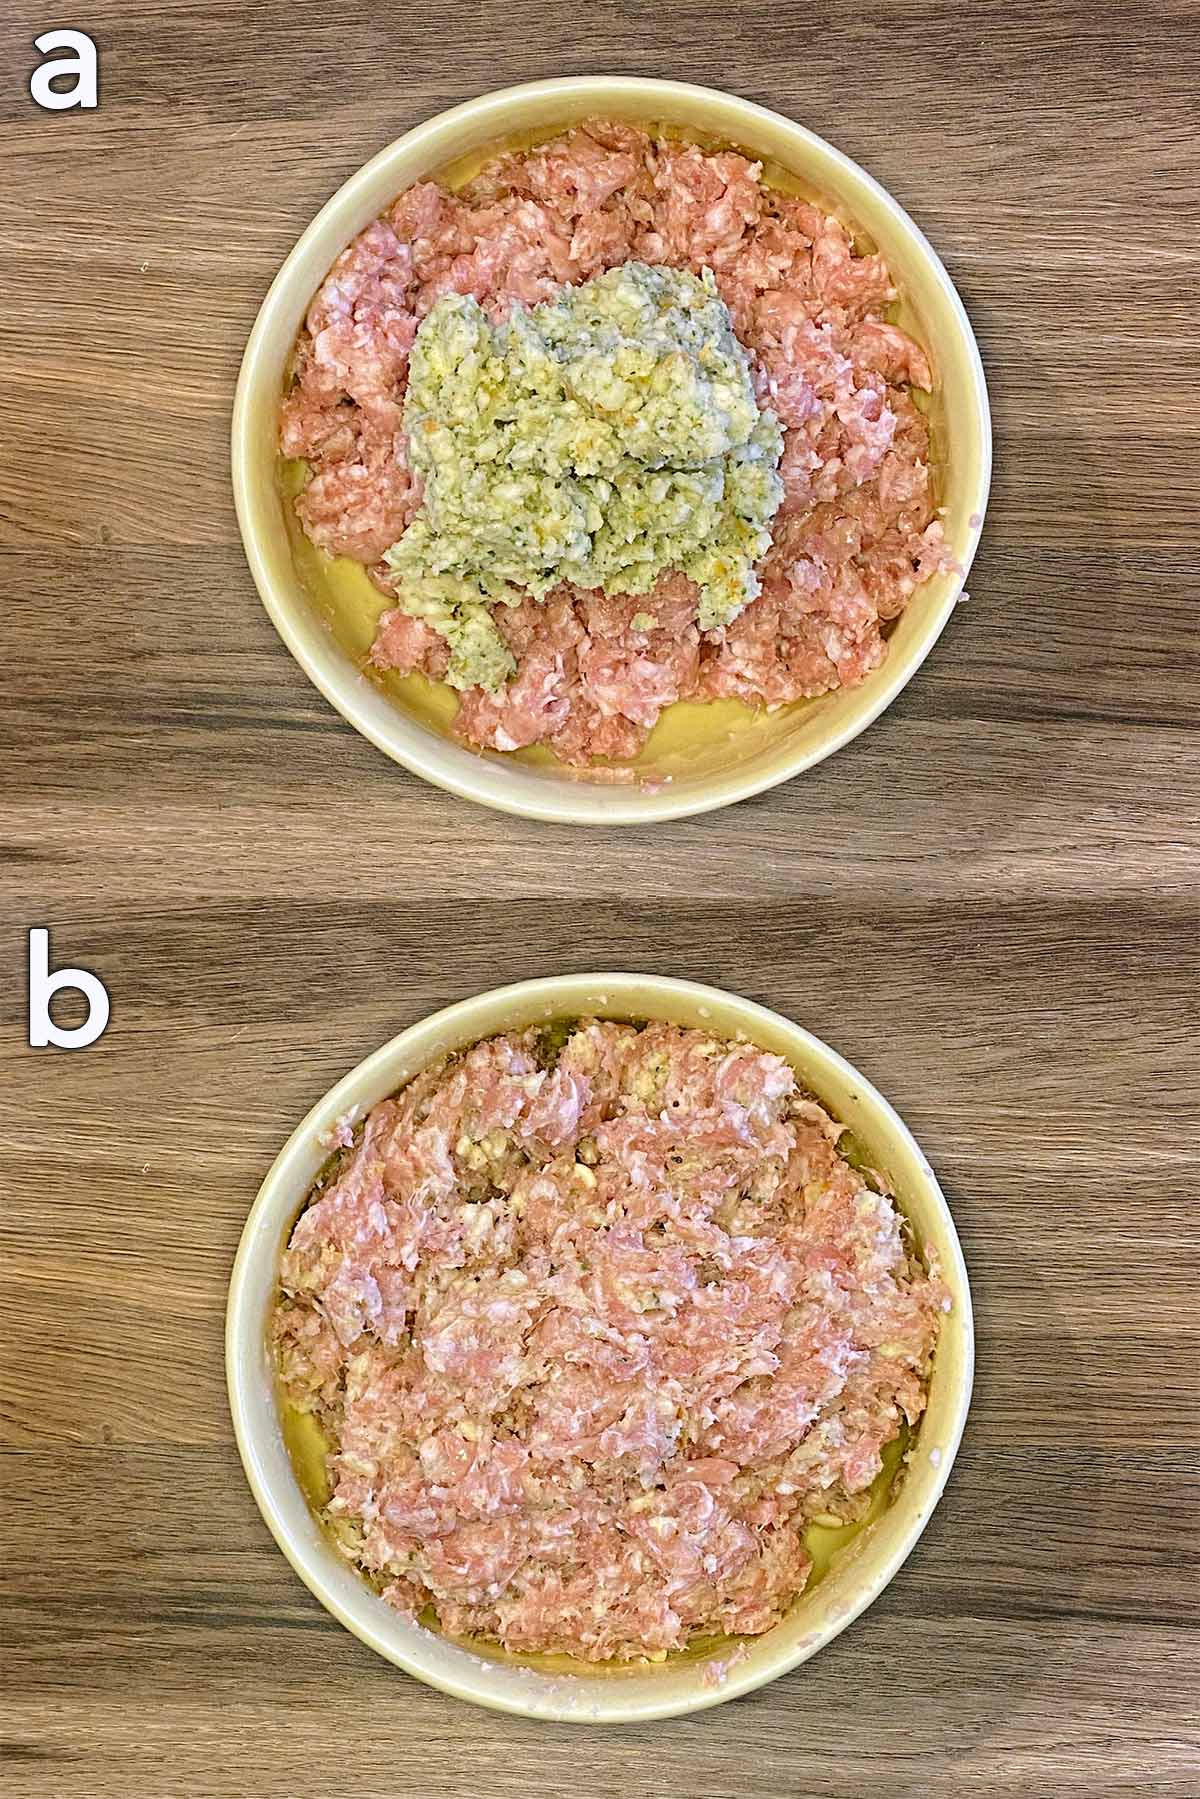 Two shot collage of sausage meat and stuffing in a bowl, before and after mixing together.